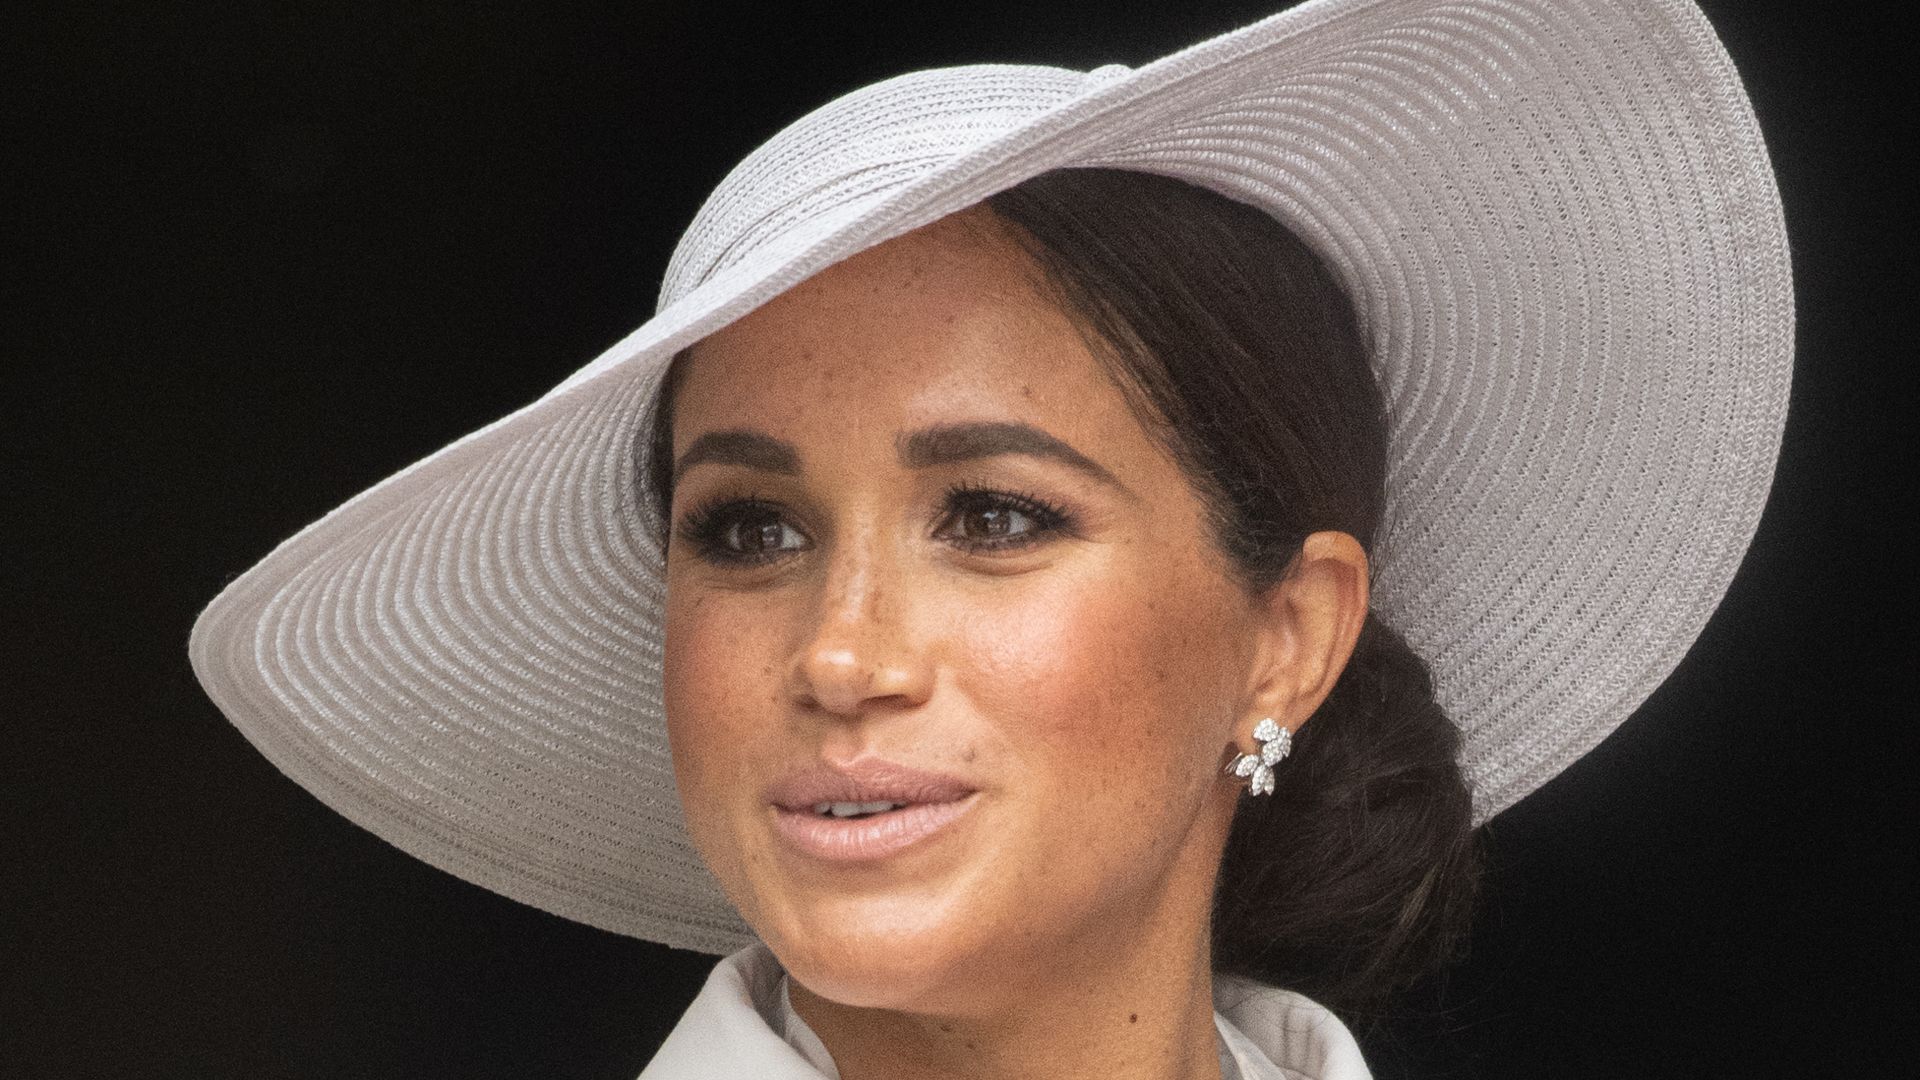 Meghan Markle in a white outfit and hat